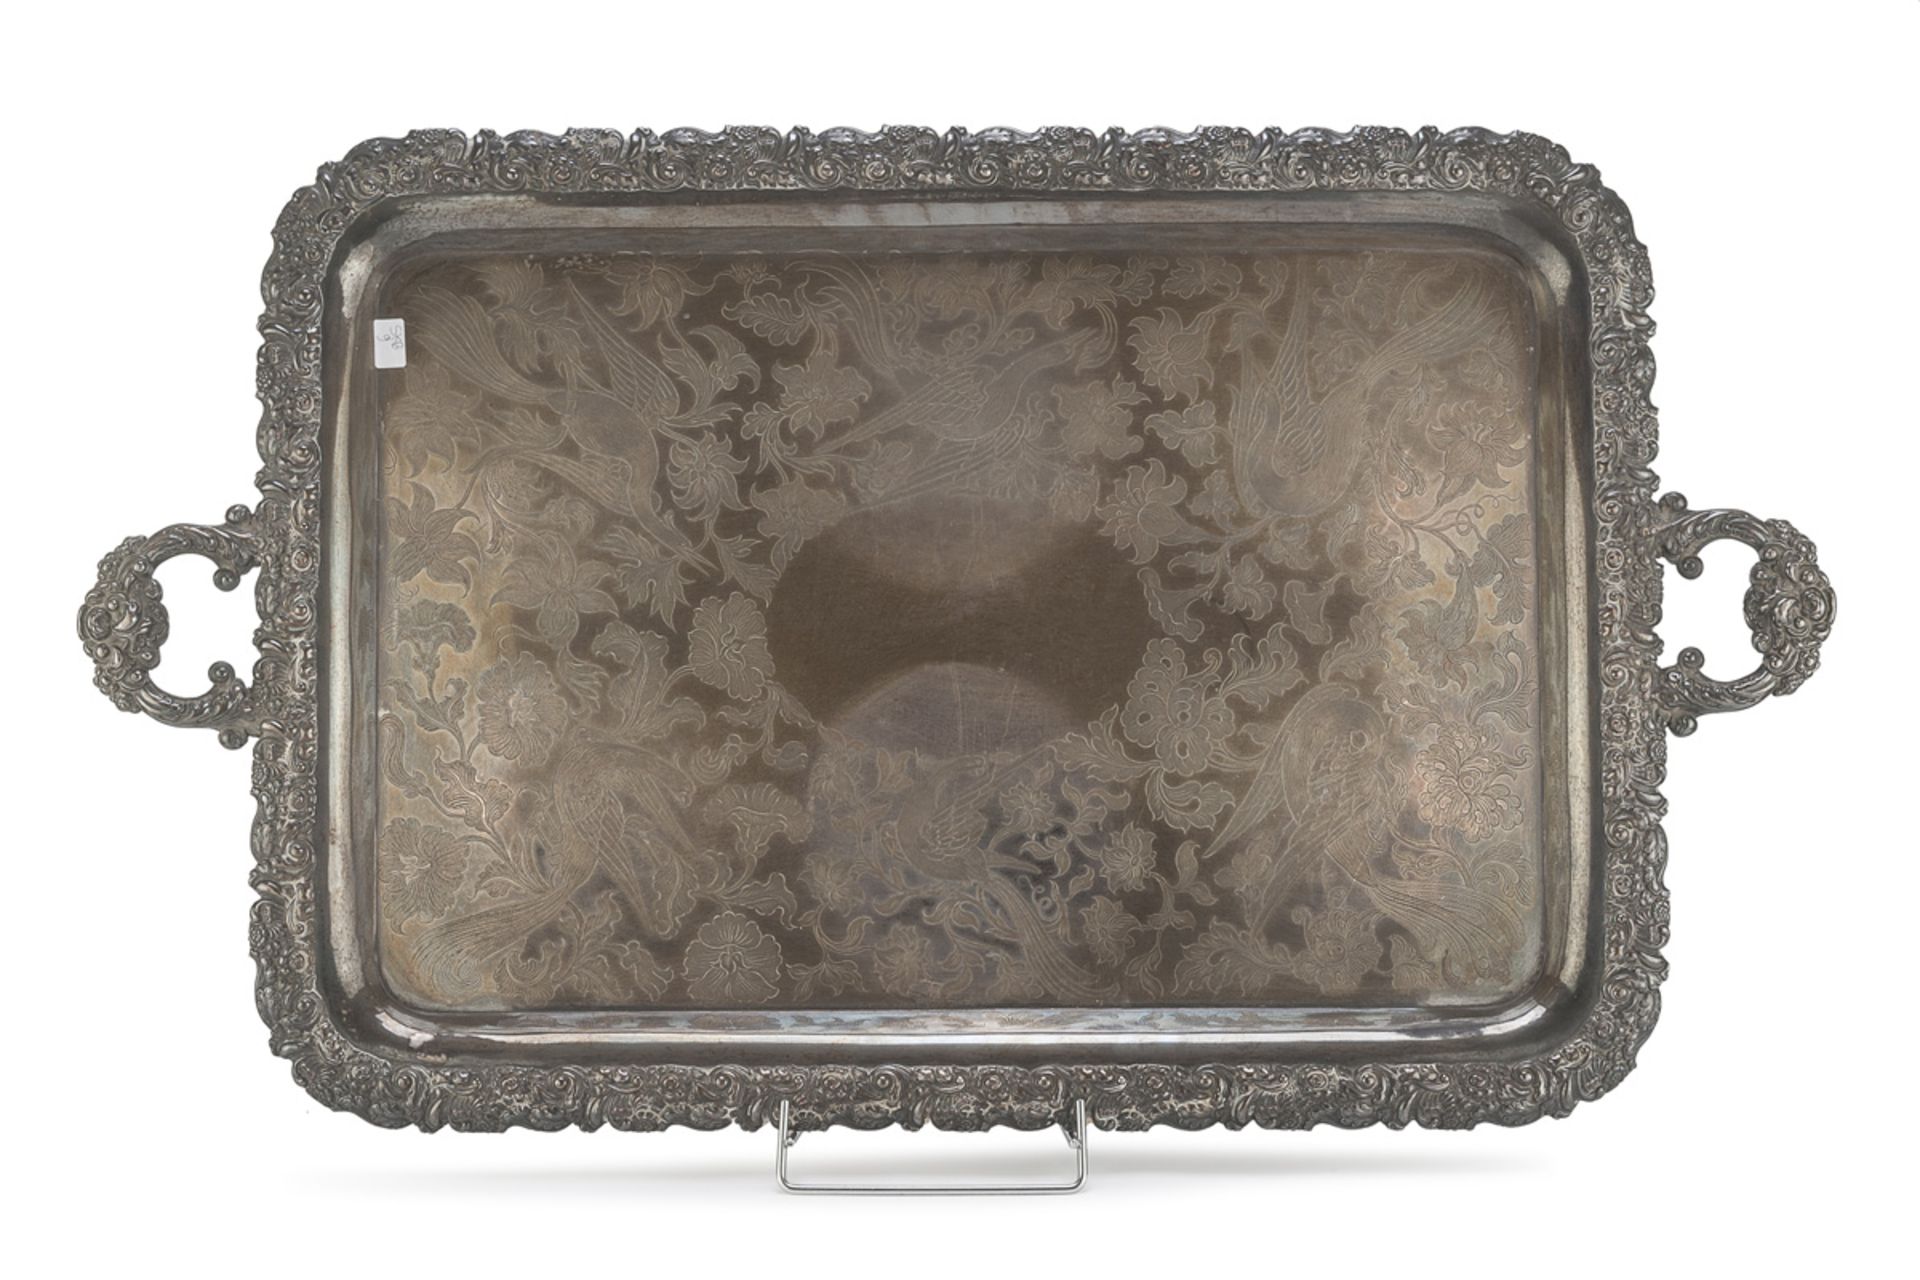 BIG SILVER-PLATED TRAY EARLY 20TH CENTURY